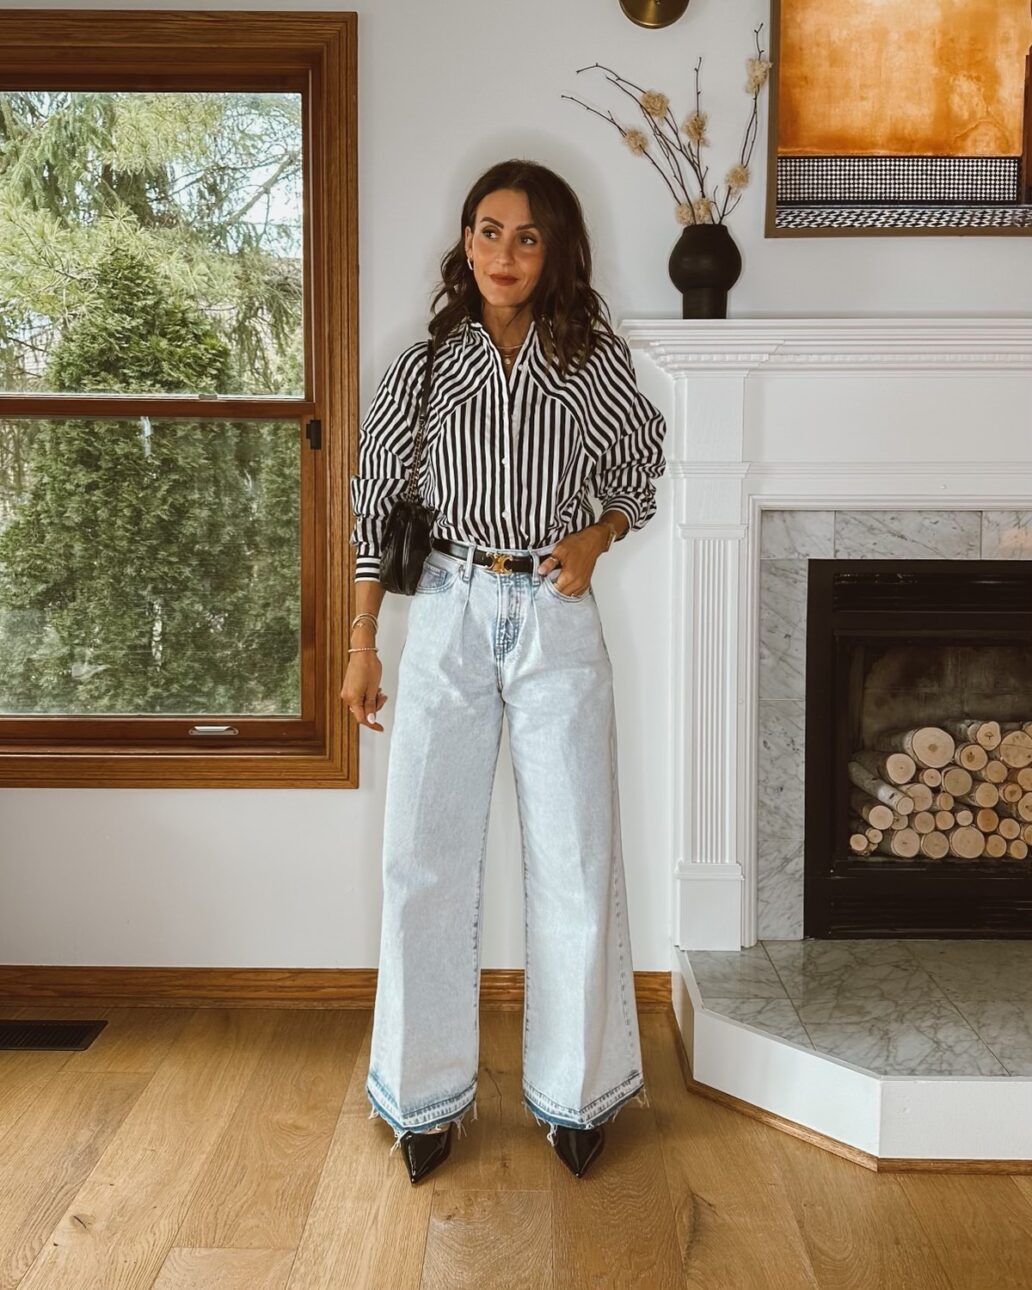 Karina wears Express wide leg jeans with striped button down shirt